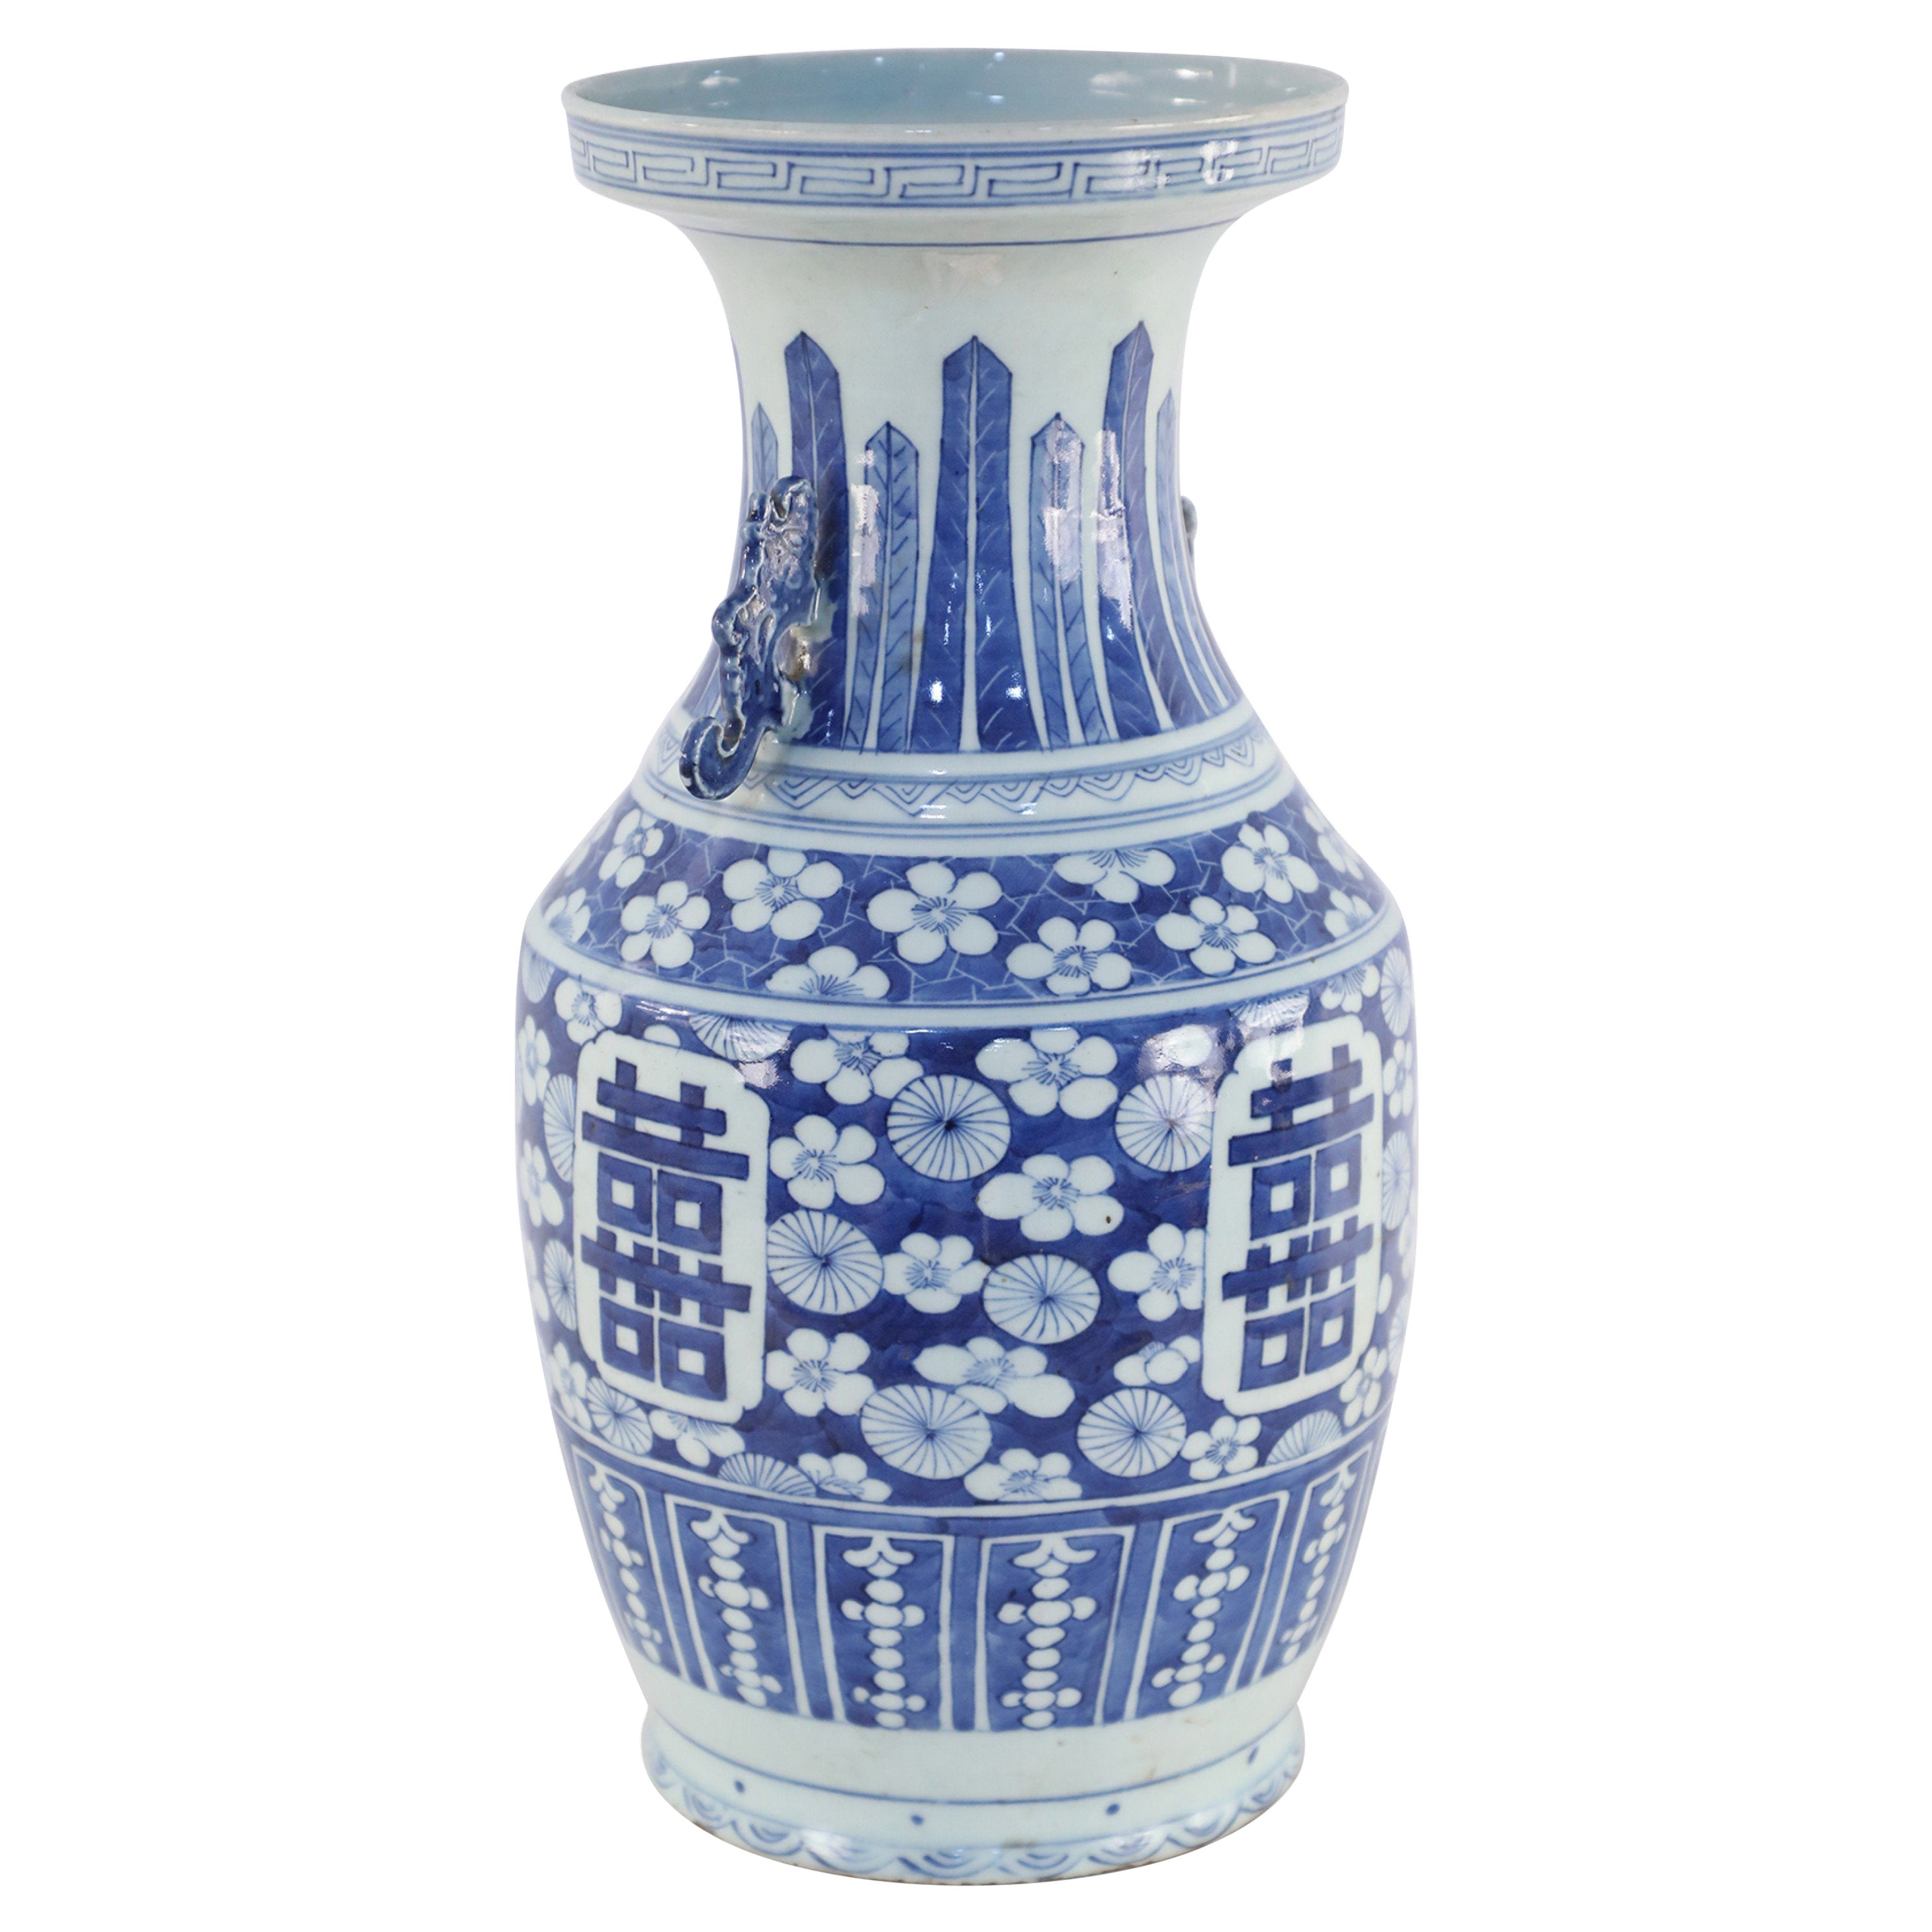 Chinese White and Blue Floral and Character Design Porcelain Urn